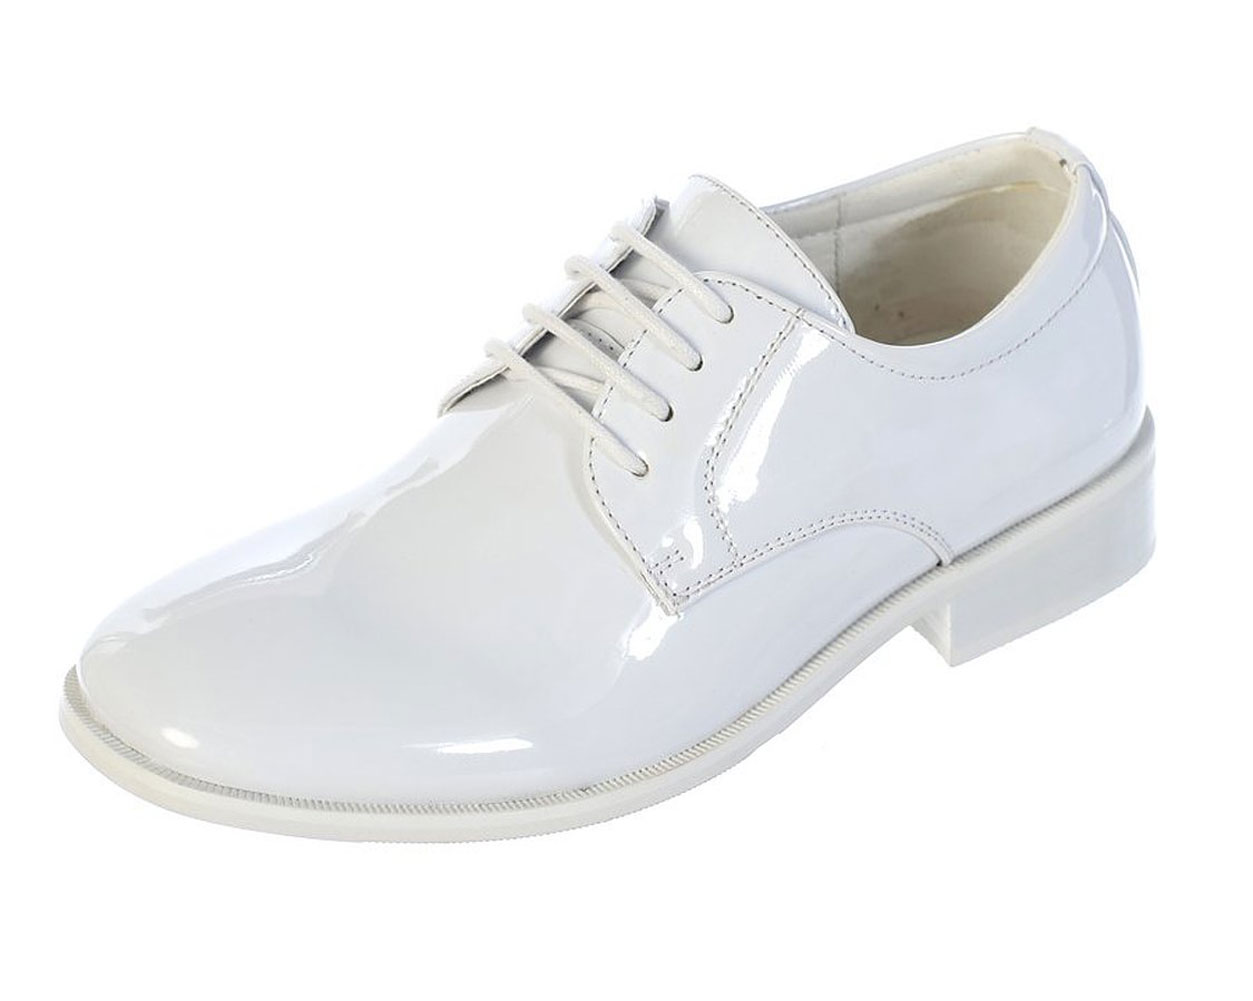 Avery Hill Boys Shiny or Shiny Patent Leather Shoes Wh Shiny Toddler 8